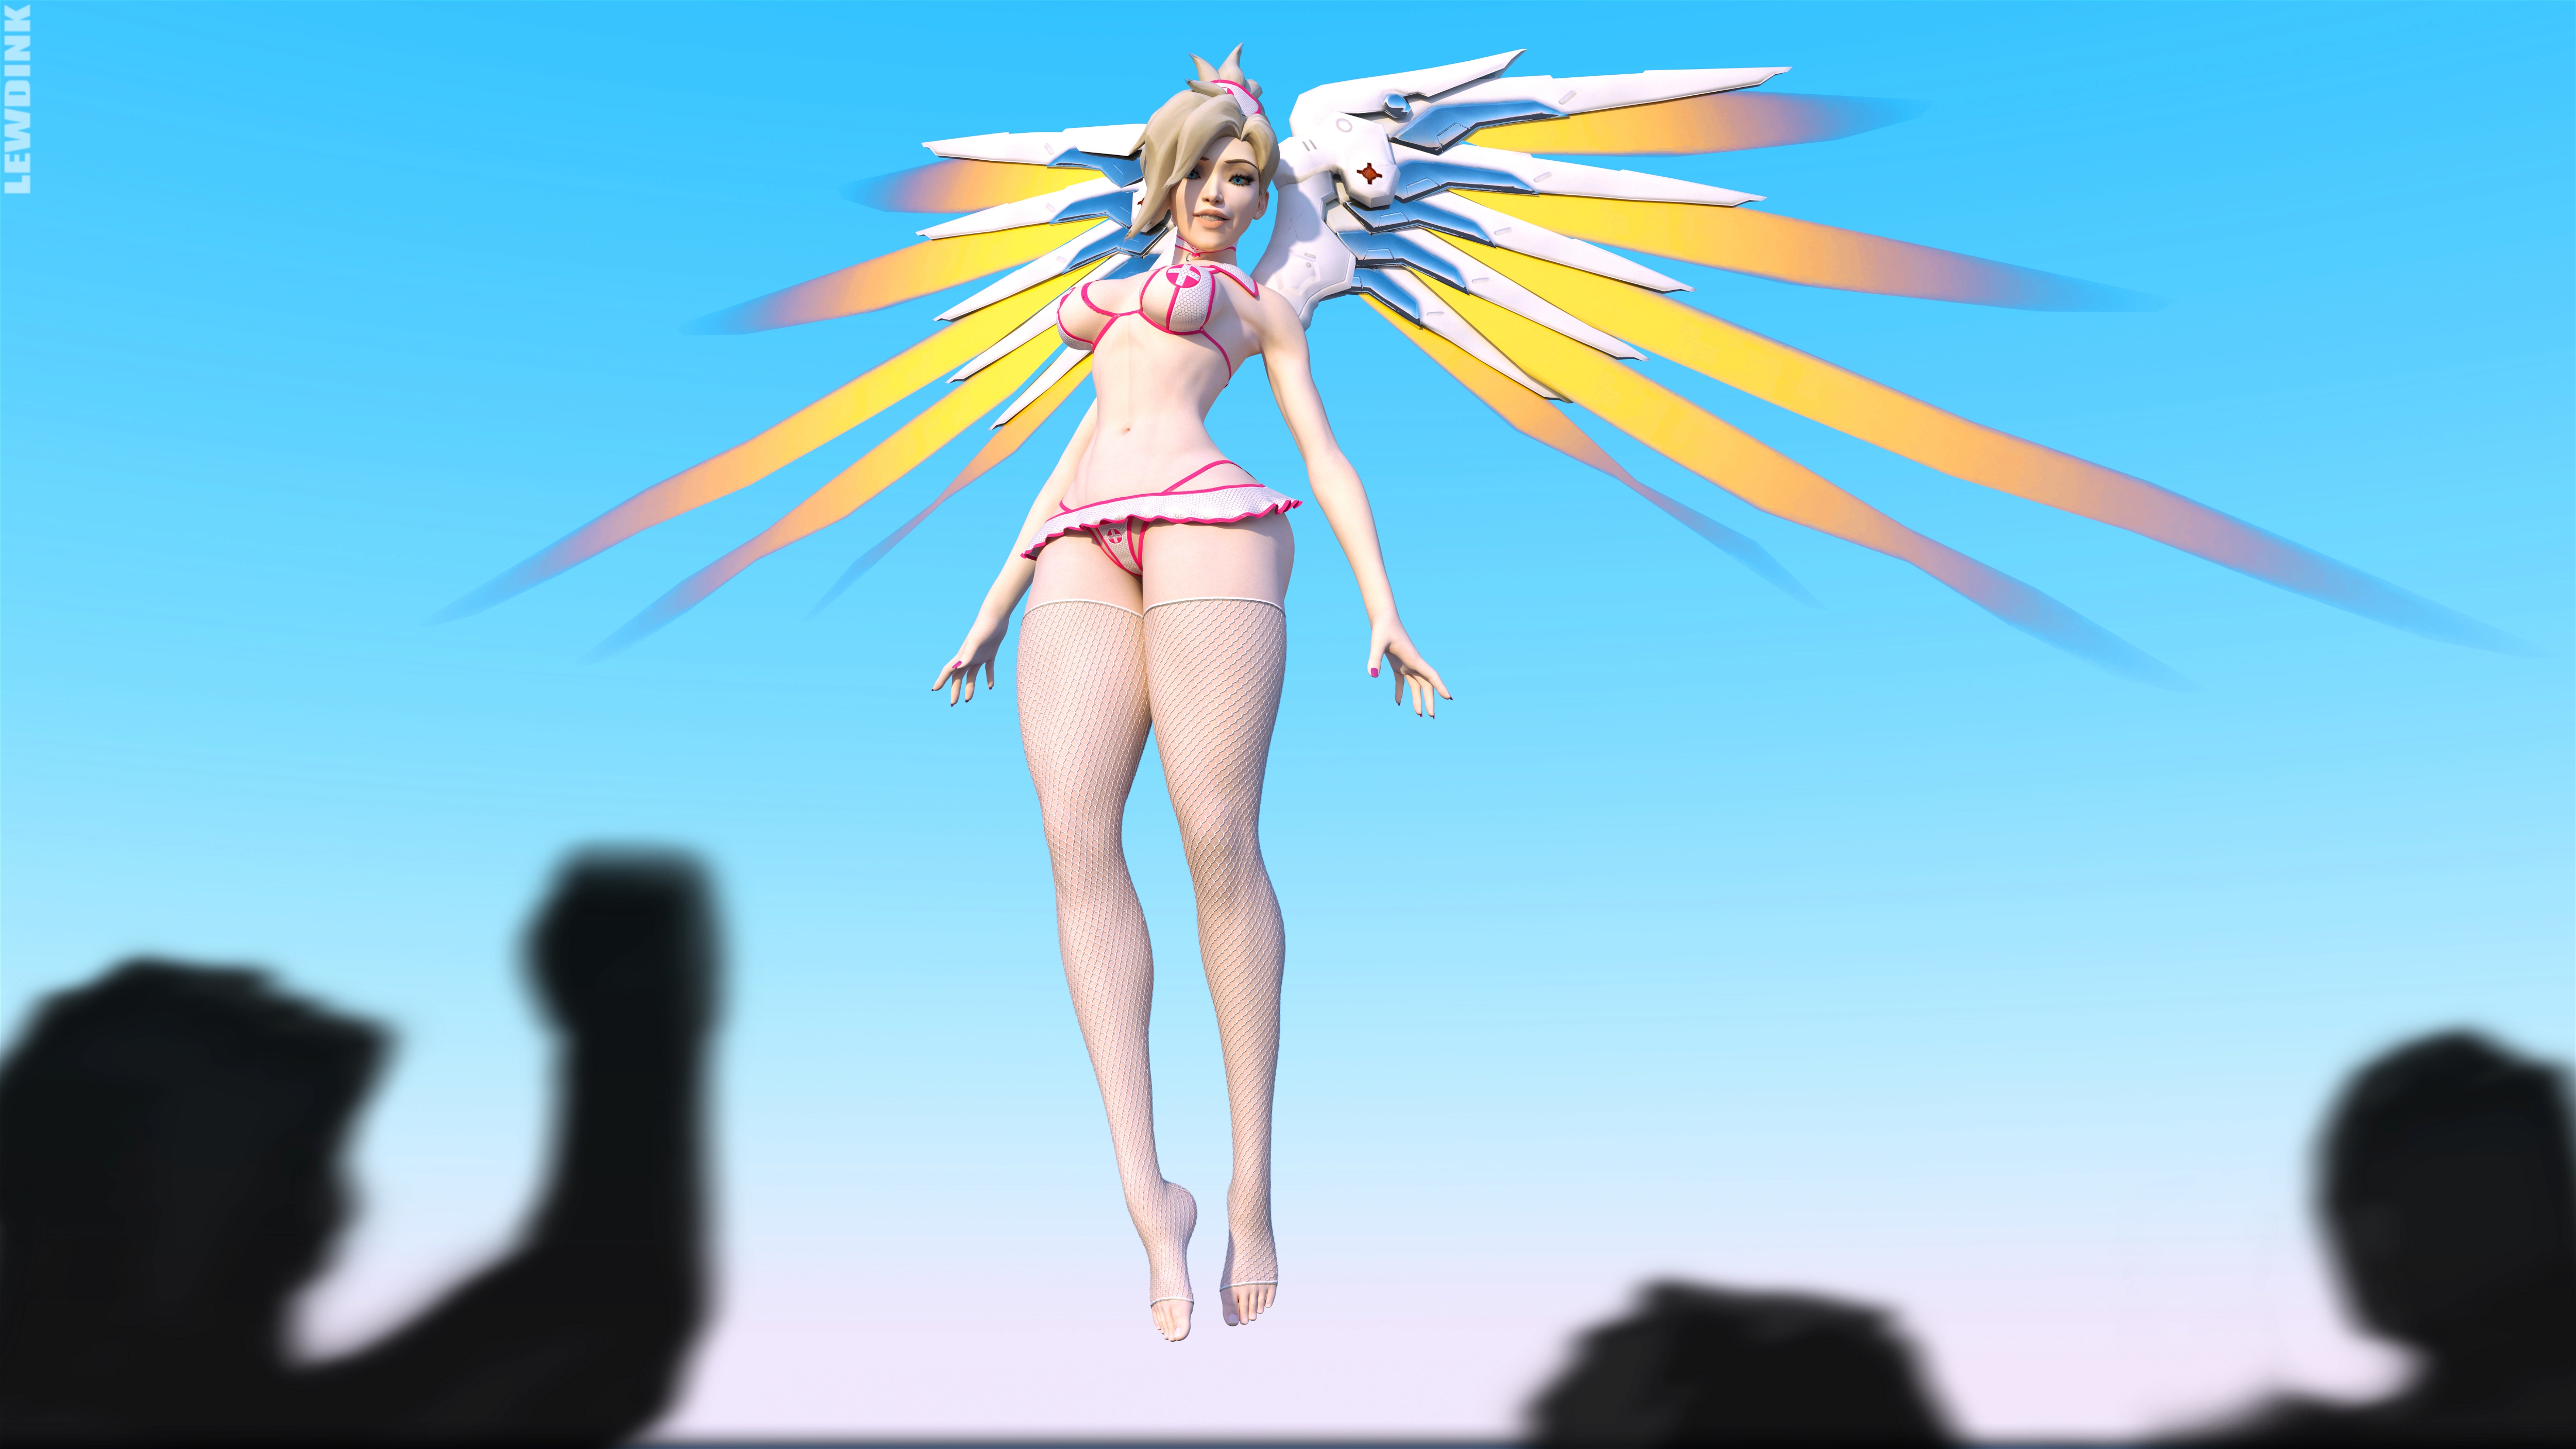 Mercy - Angel Mercy Mercyoverwatch Overwatch Muscular Girl 3d Porn 3d Girl 3dnsfw 3dxgirls Abs Sexy Hot Bimbo Huge Boobs Huge Tits Muscles Musclegirl Pinup Perfect Body Fuck Hard Sexyhot Sexy Ass Sexy Woman Fake Tits Lips Latex Flexible Smirking Big Tits Huge Ass Big Booty Booty Fit Fitness Thicc Mom Milf Mature Mature Woman Spread Legs Spread Thick Thighs Horny Face Short Hair Hardcore Curvy Big Ass Big boobs Big Breasts Big Butt Brown Eyes Cleavage Fishnet Stockings Fishnet Nipple Piercing Piercing Belly Button Piercing Leather Jacket Thighs Jewels Pawg Ass Red head Tribal Weapon Armor Nude Boobs Pregnant Big Balls Big Nipples Lingerie Sexy Lingerie Womb Tattoo Face Tattoo Slut Whore Bitch Comic Hotpants Shorts Long Hair Smile Blonde Graffiti Splash Body Paint Paint Squatting Japanese Korean Asian Pussy Pubic Hair Wings Flying 2